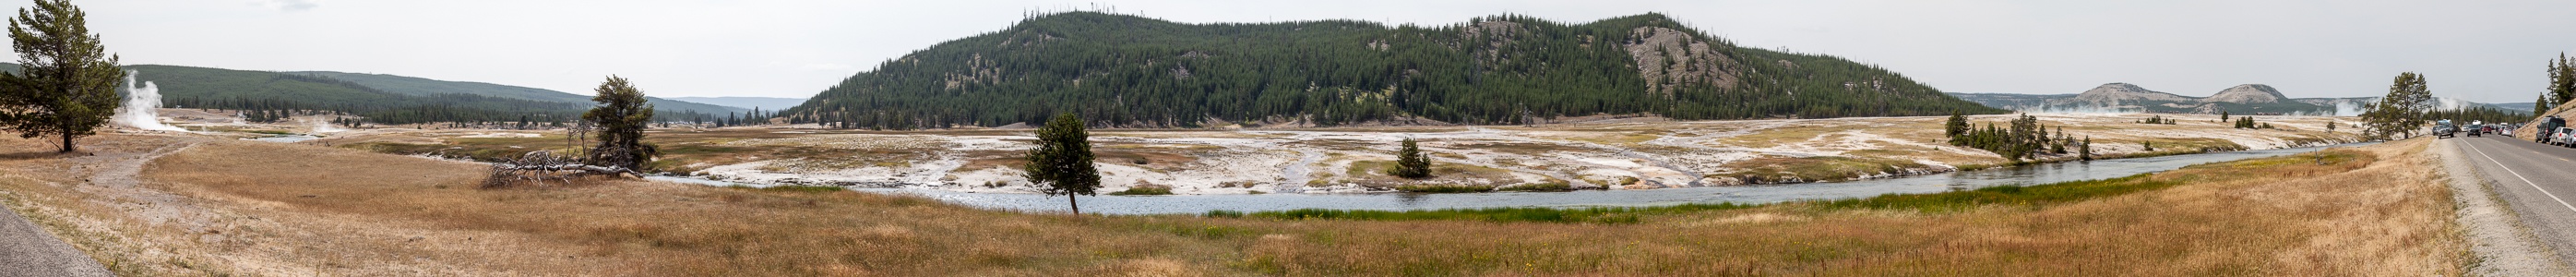 Yellowstone National Park Midway Geyser Basin Firehole River